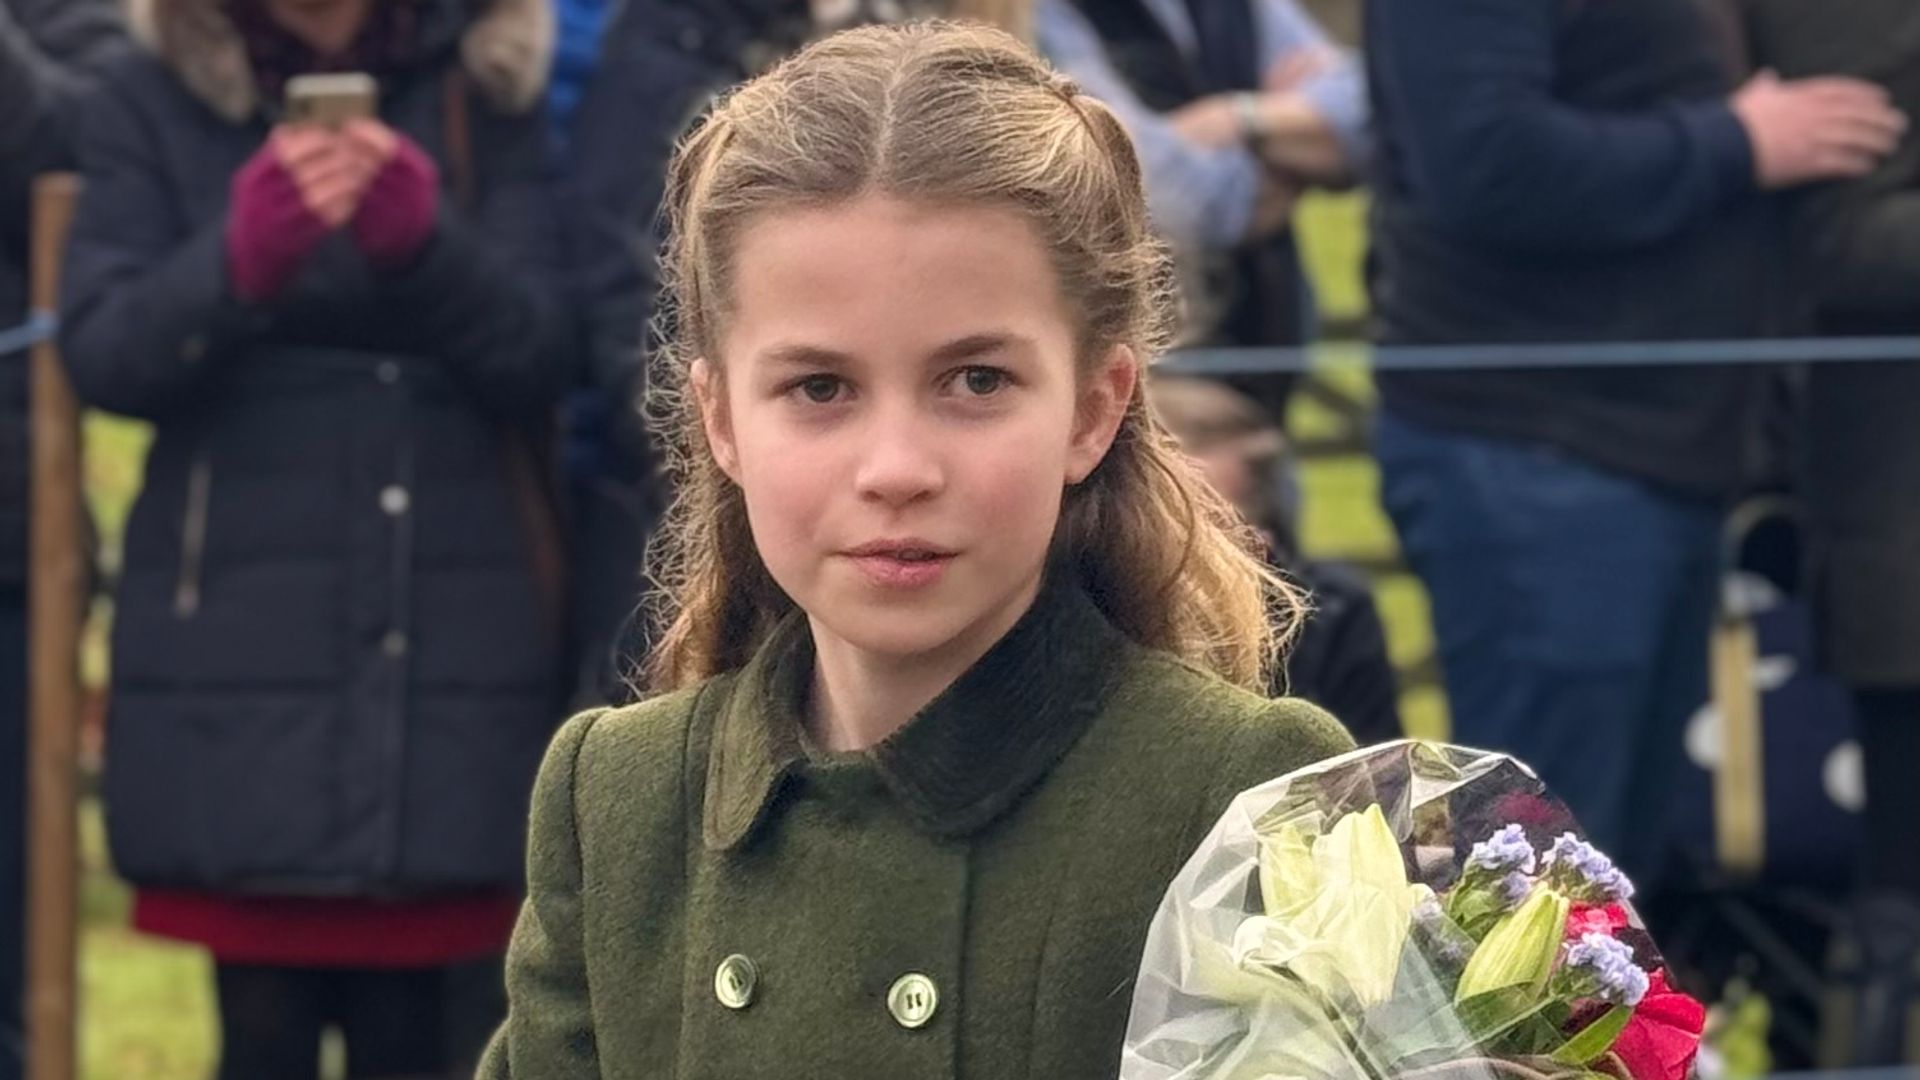 Princess Charlotte spoke with well-wishers outside the church on Christmas Day